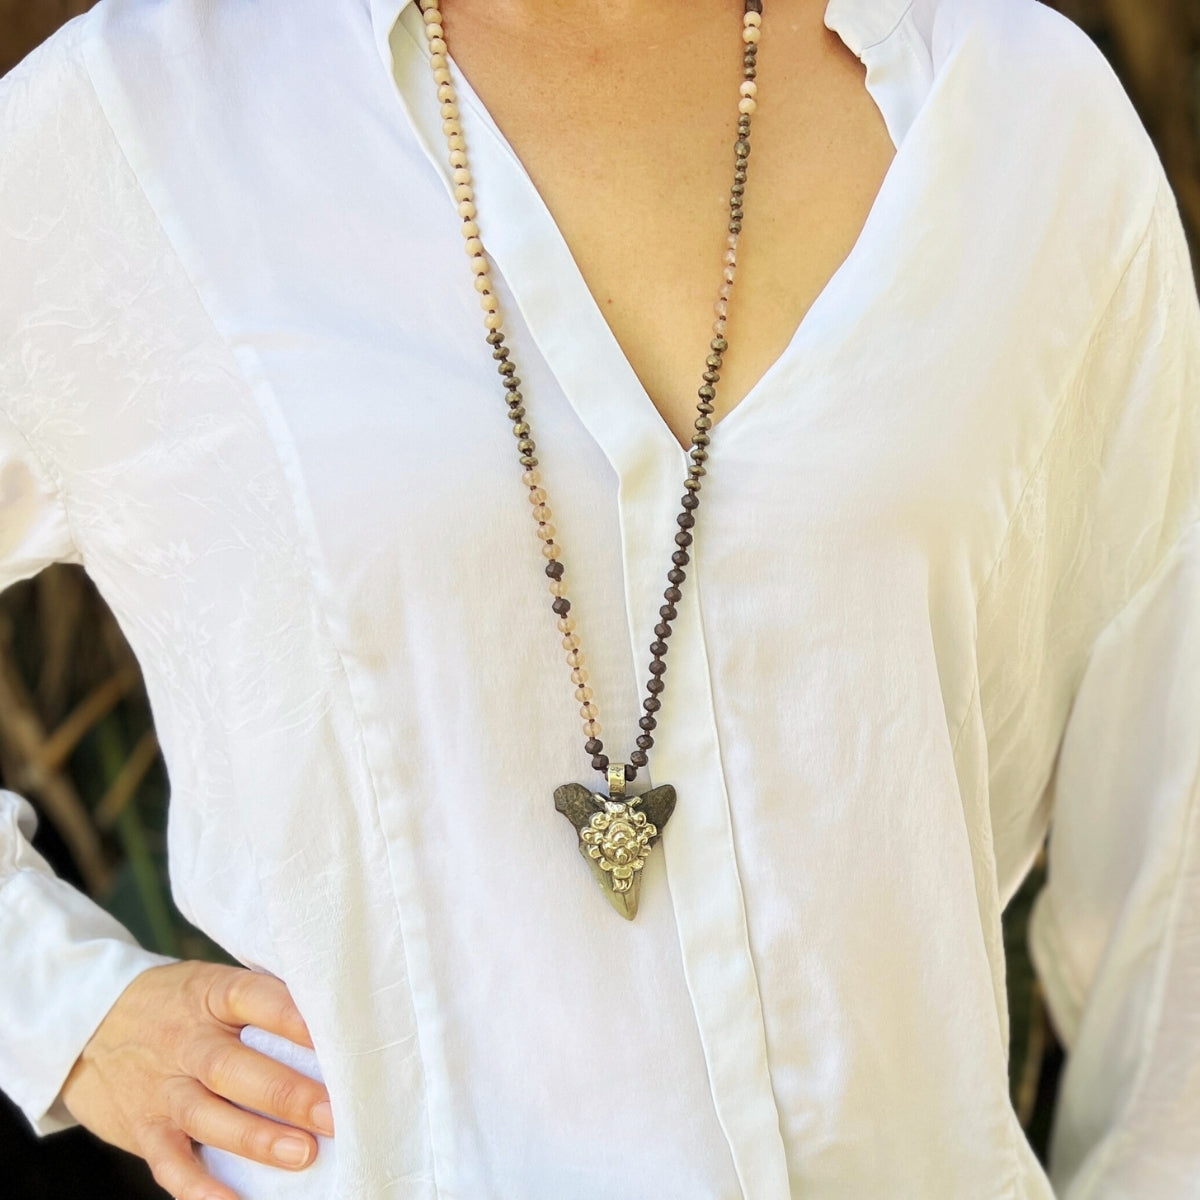 Nautical Nomad: Fossilized Shark Tooth Necklace  - One of a Kind